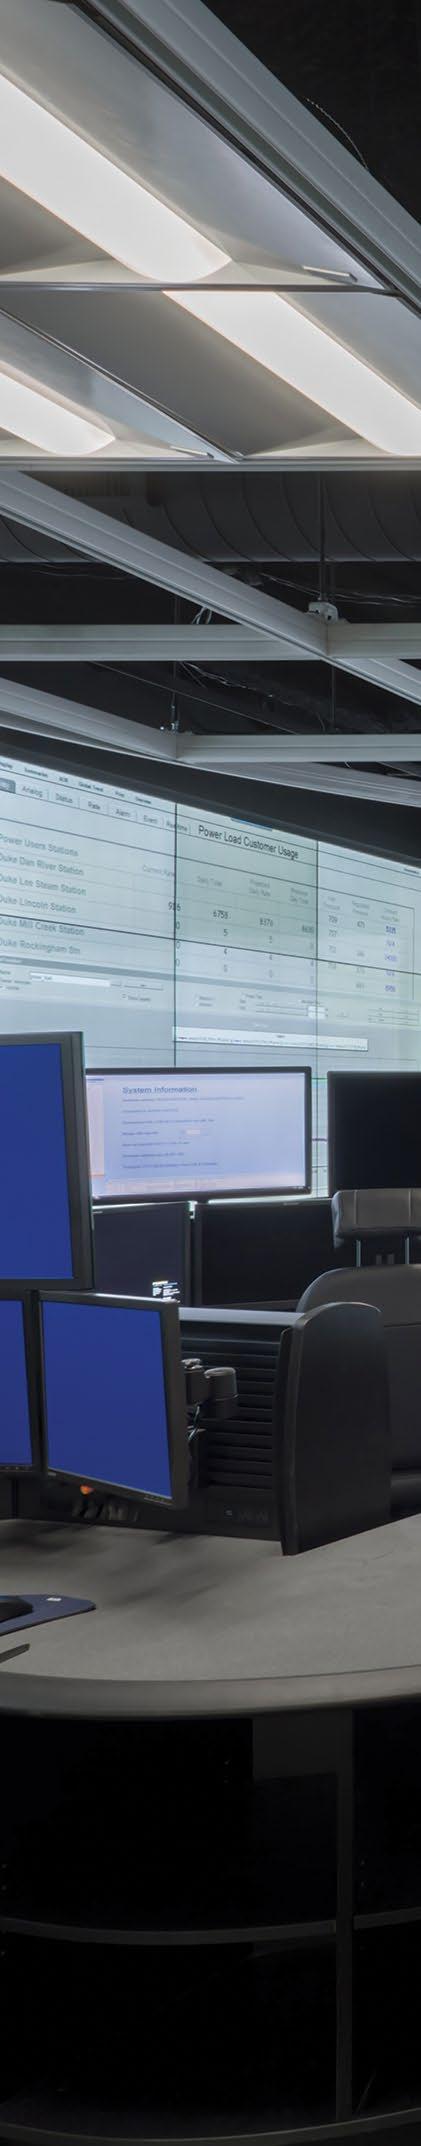 DynamicBlu Spectrum Control for Optimal 24/7 Operator Performance, Productivity and Health THE LIGHTING SOLUTION for CONTROL ROOMS and 24/7 MISSION CRITICAL ENVIRONMENTS Aviation THE CHALLENGE: 24/7